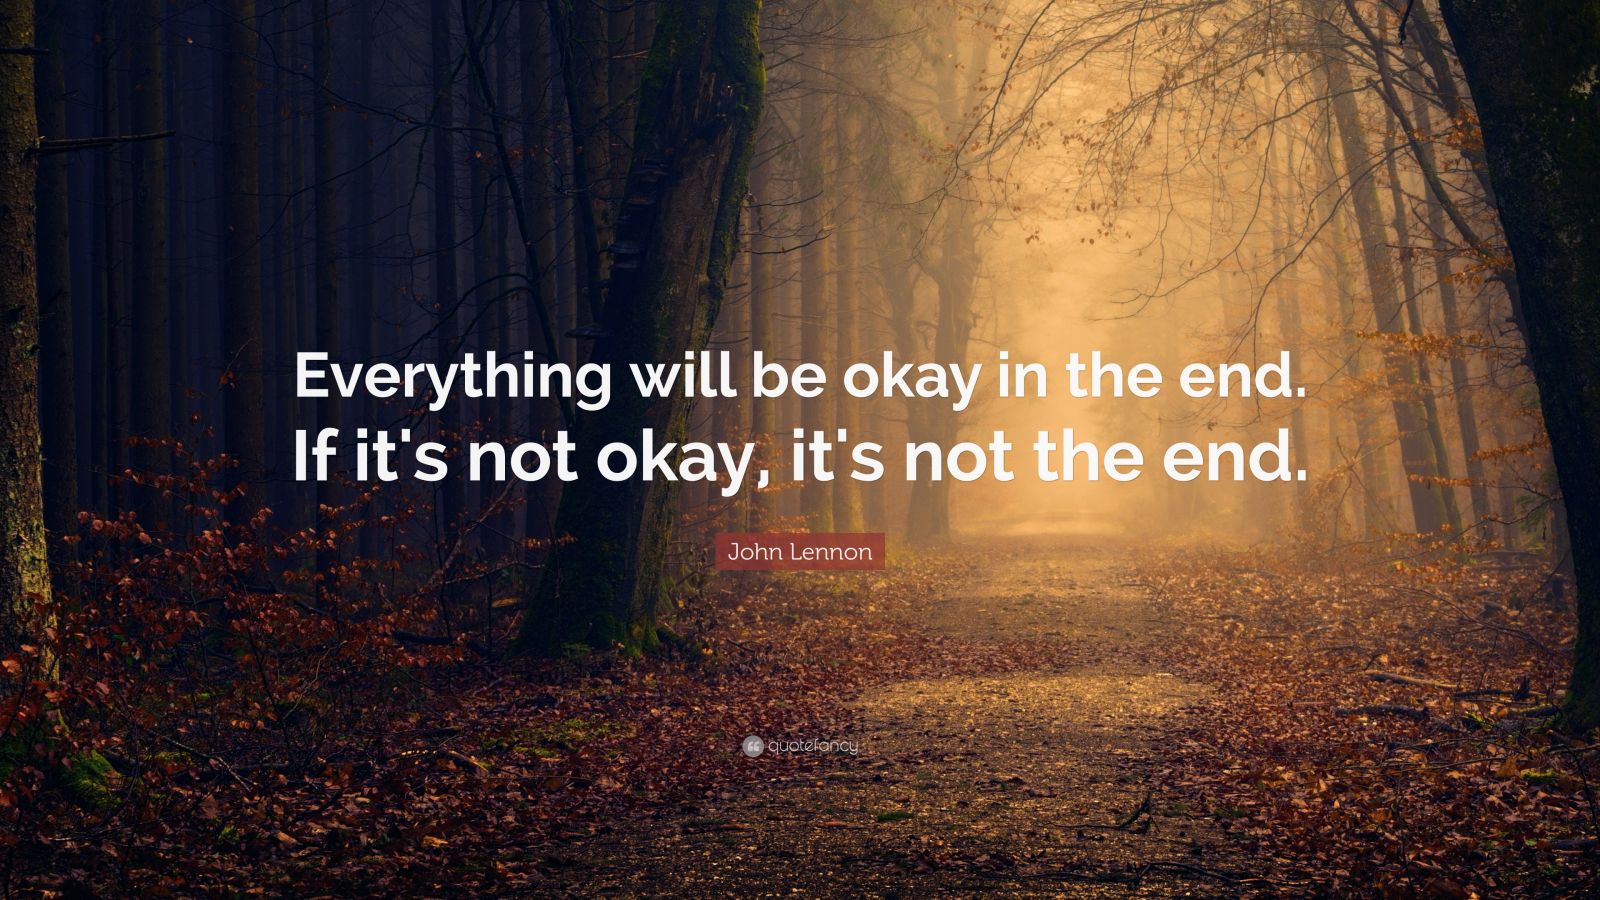 John Lennon Quote “Everything will be okay in the end. If